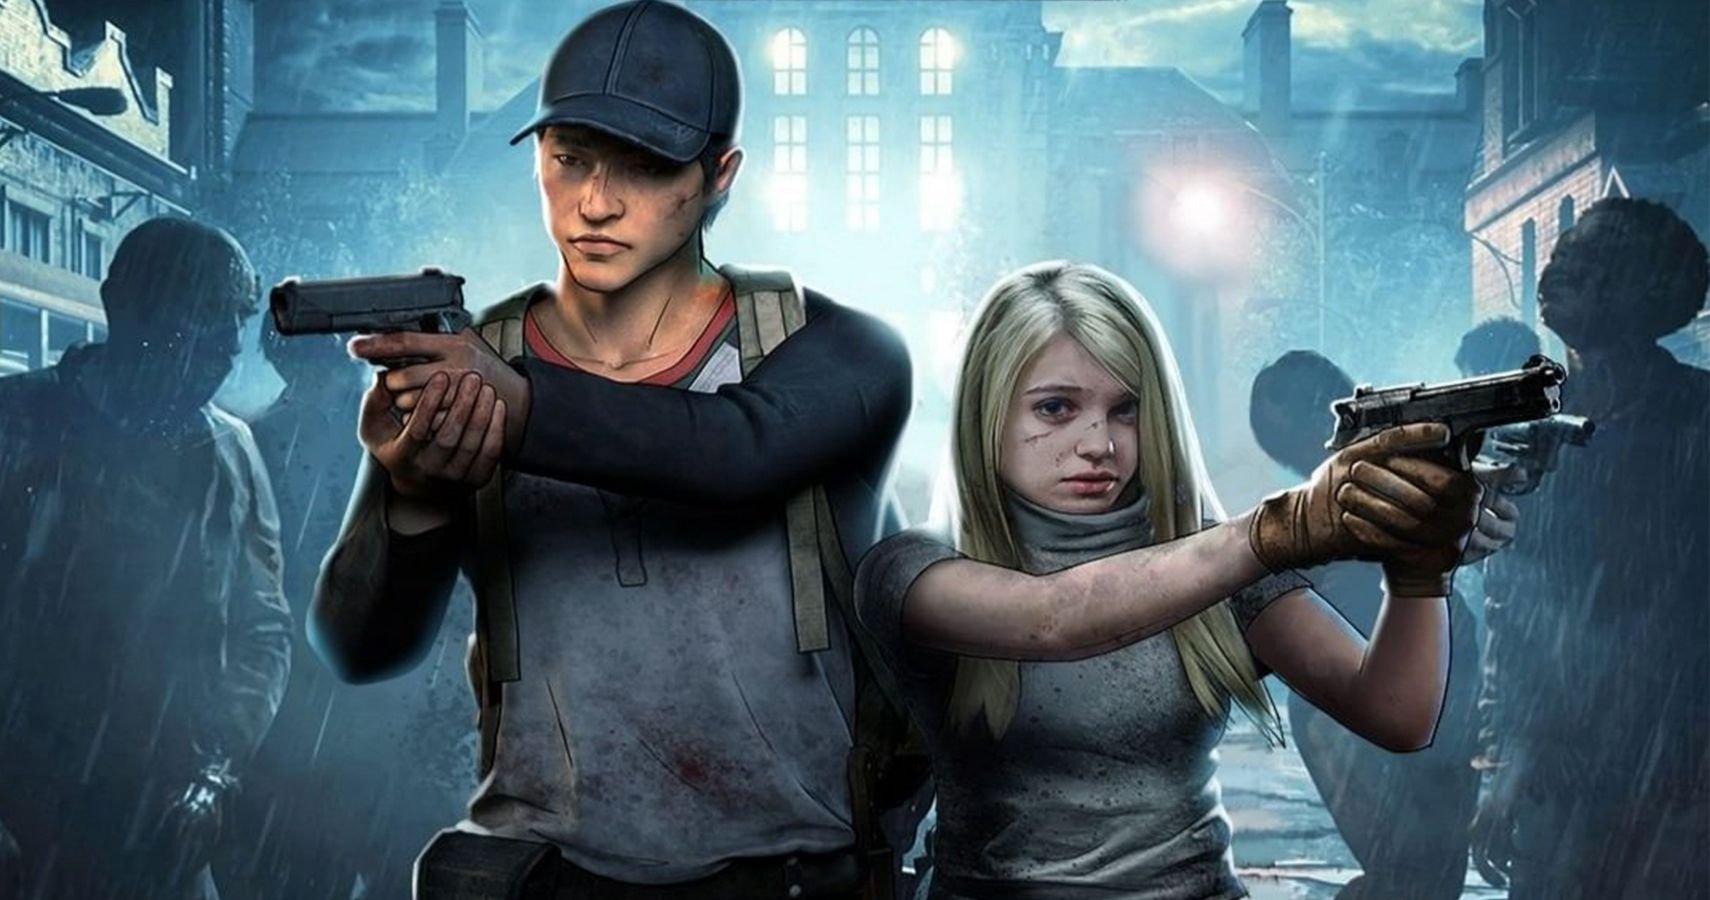 The Walking Dead Survivors Ad Blatantly Copies Resident Evil Artwork, And It's Hilarious